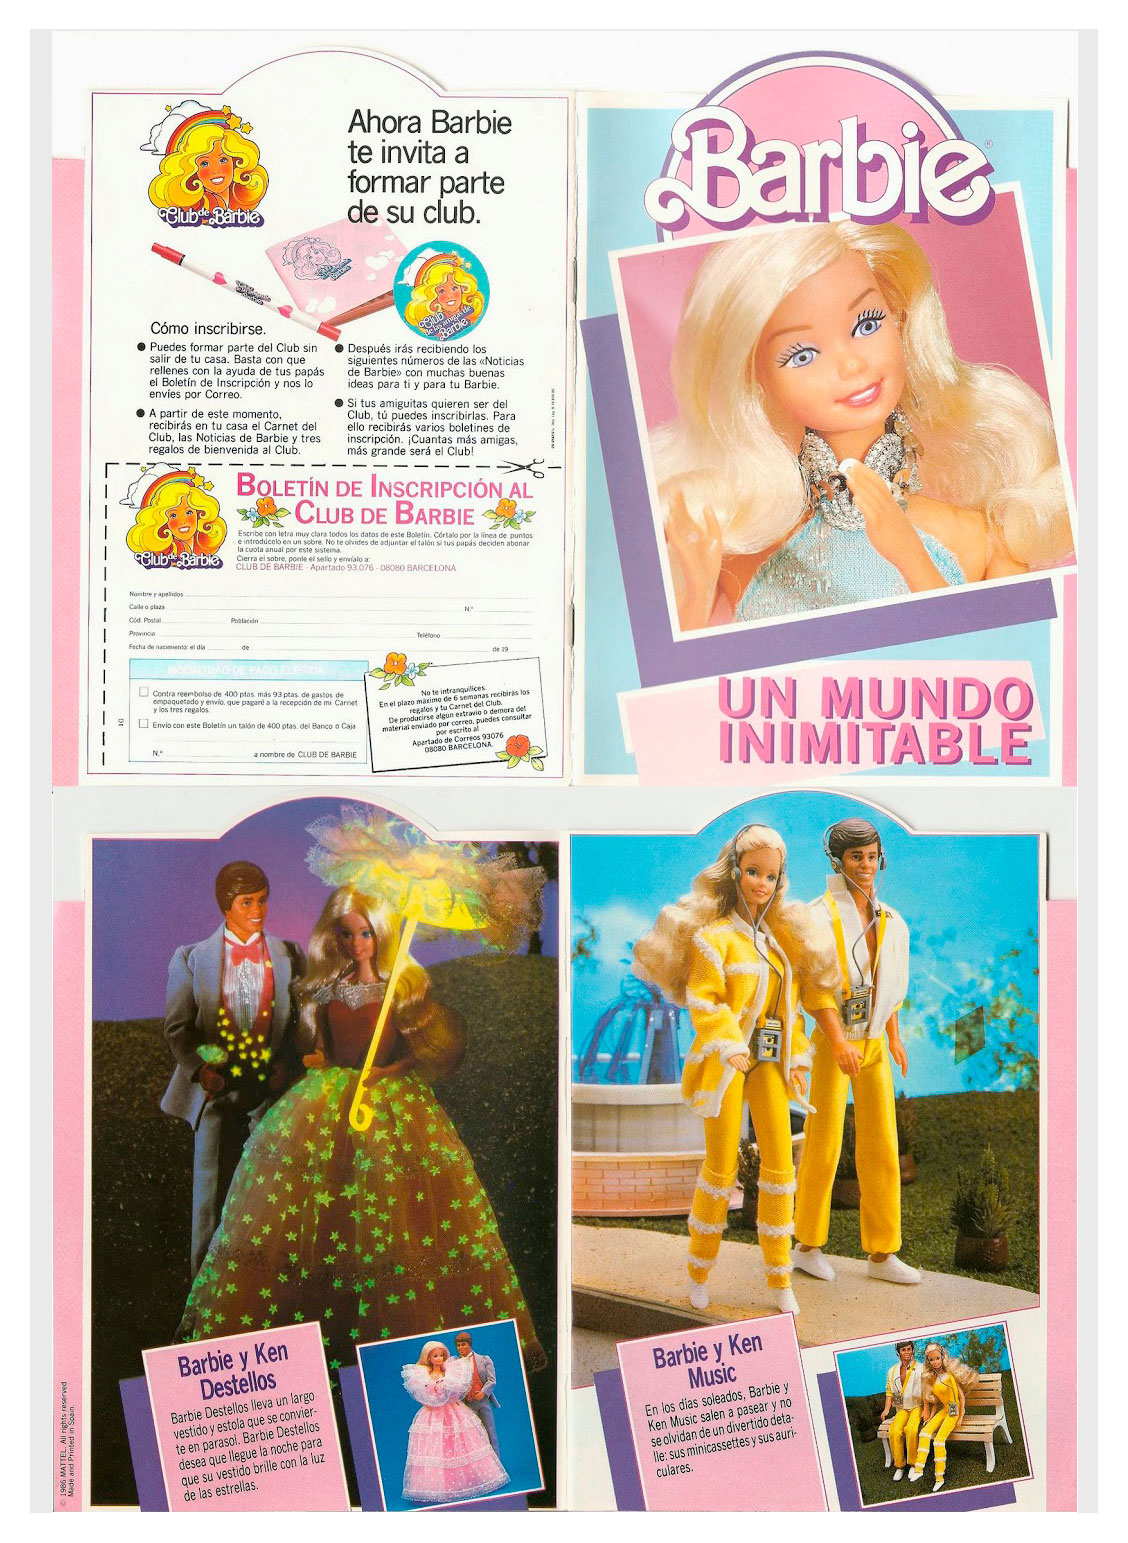 From 1986 Spanish Barbie booklet